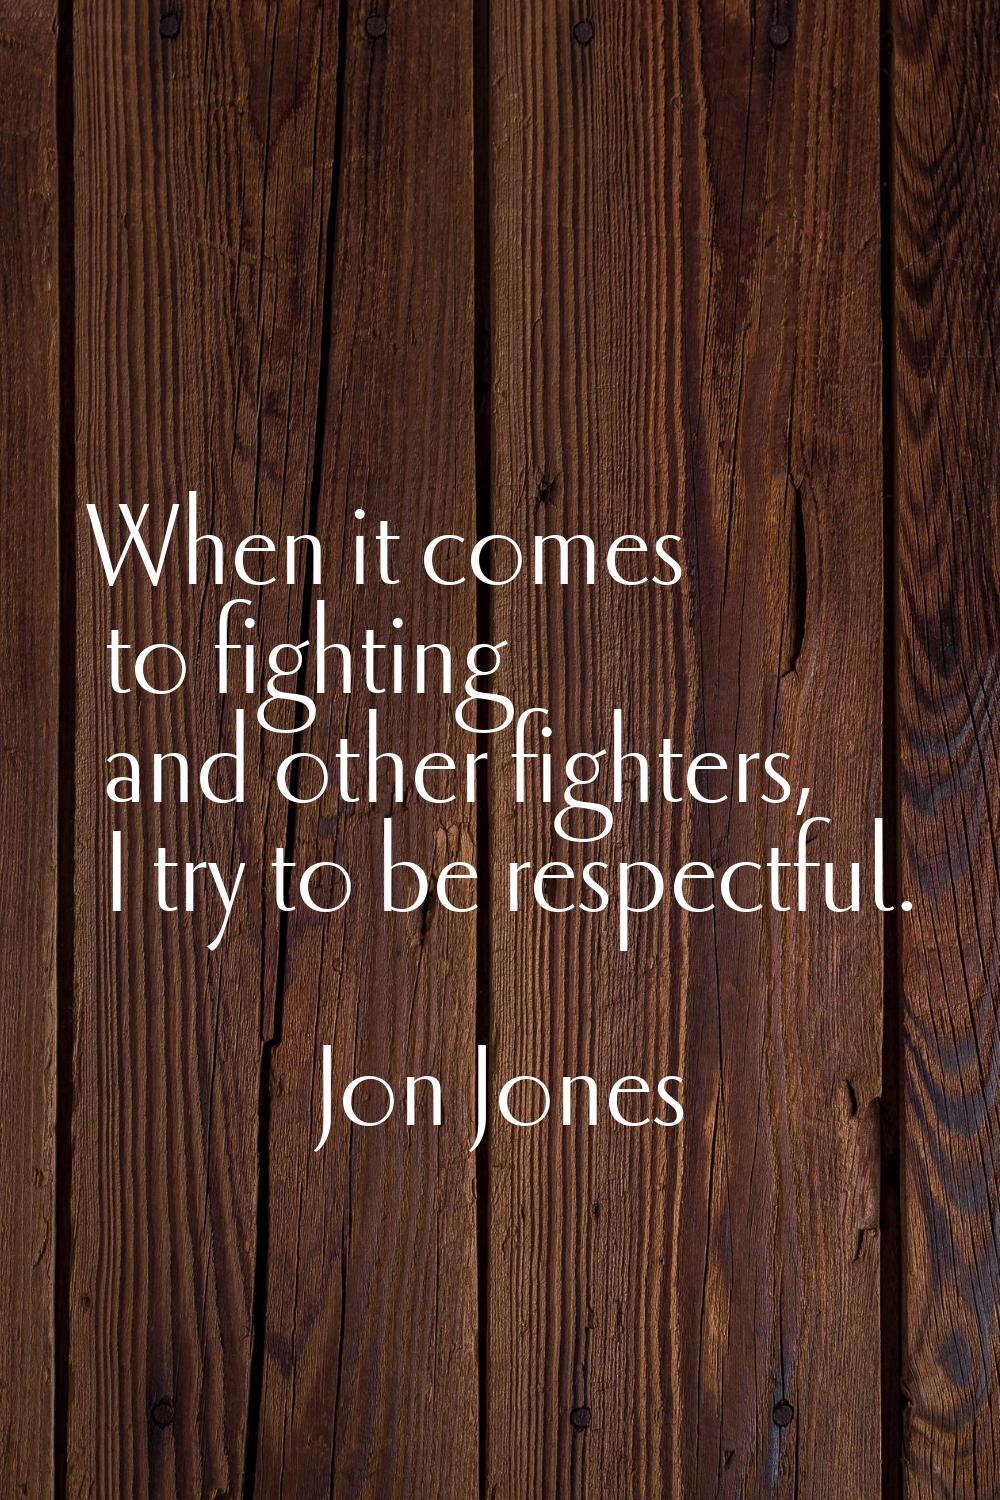 When it comes to fighting and other fighters, I try to be respectful.